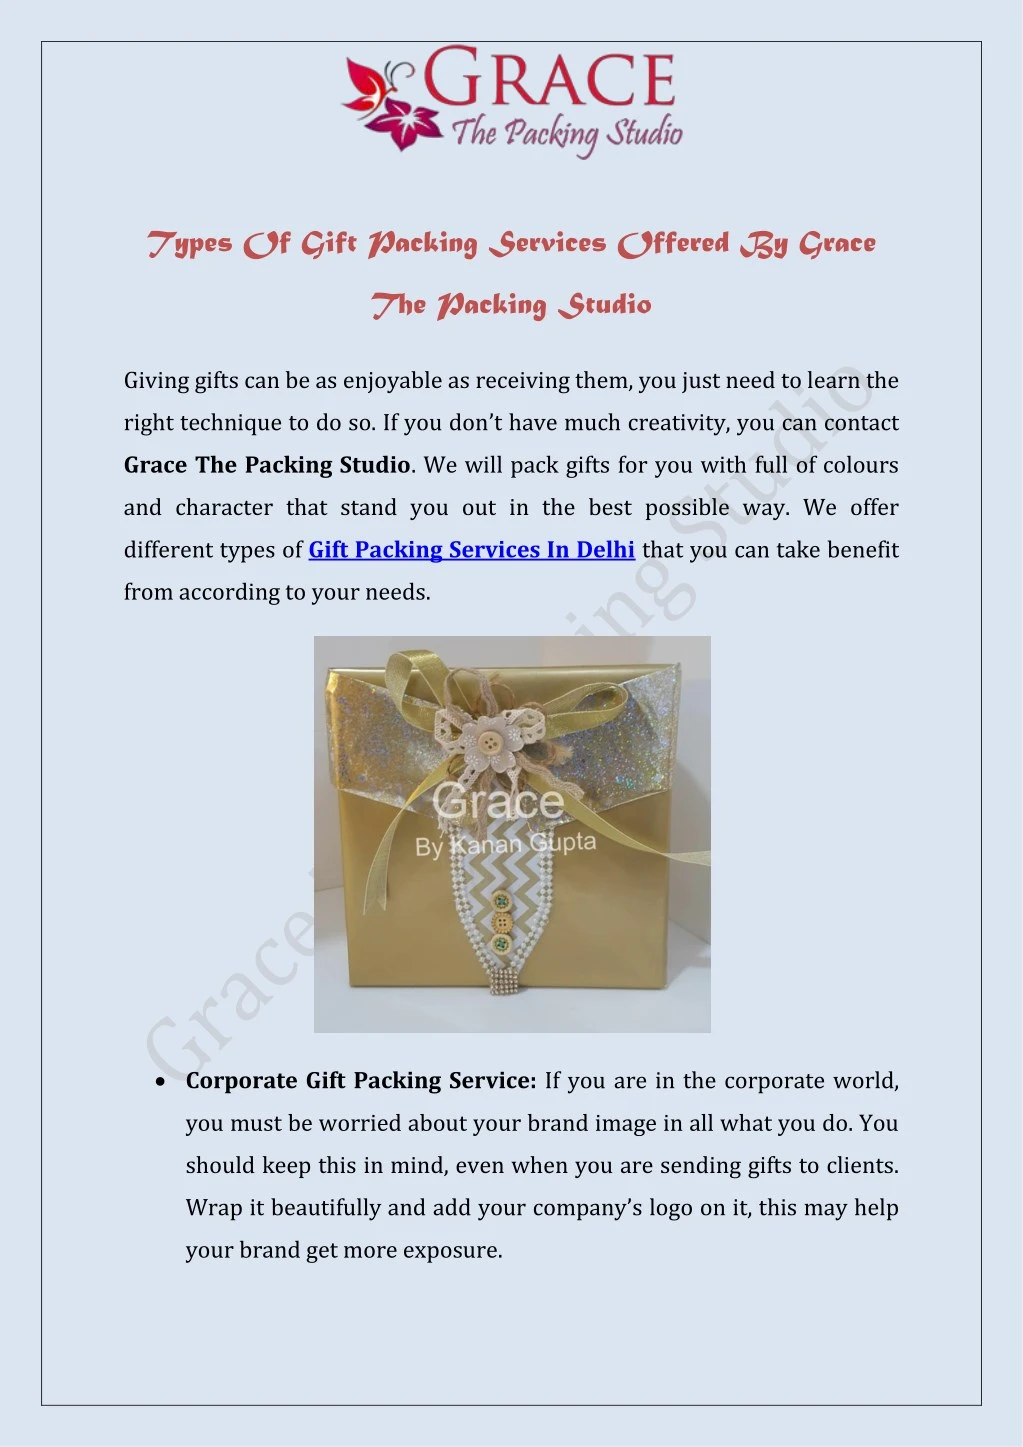 types of gift packing services offered by grace